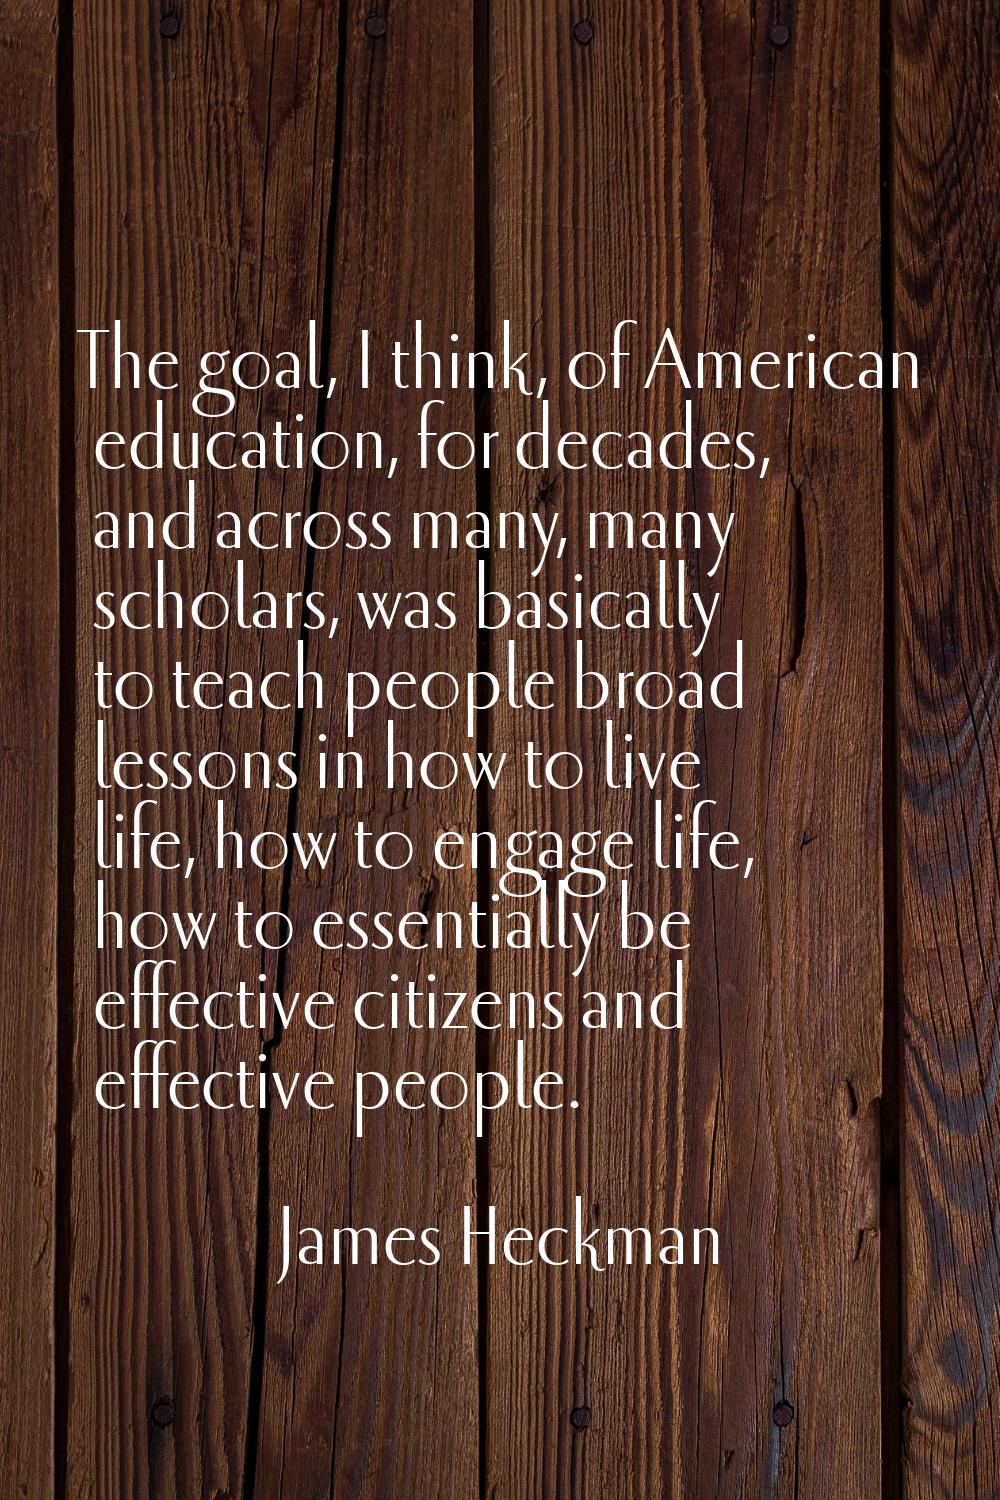 The goal, I think, of American education, for decades, and across many, many scholars, was basicall